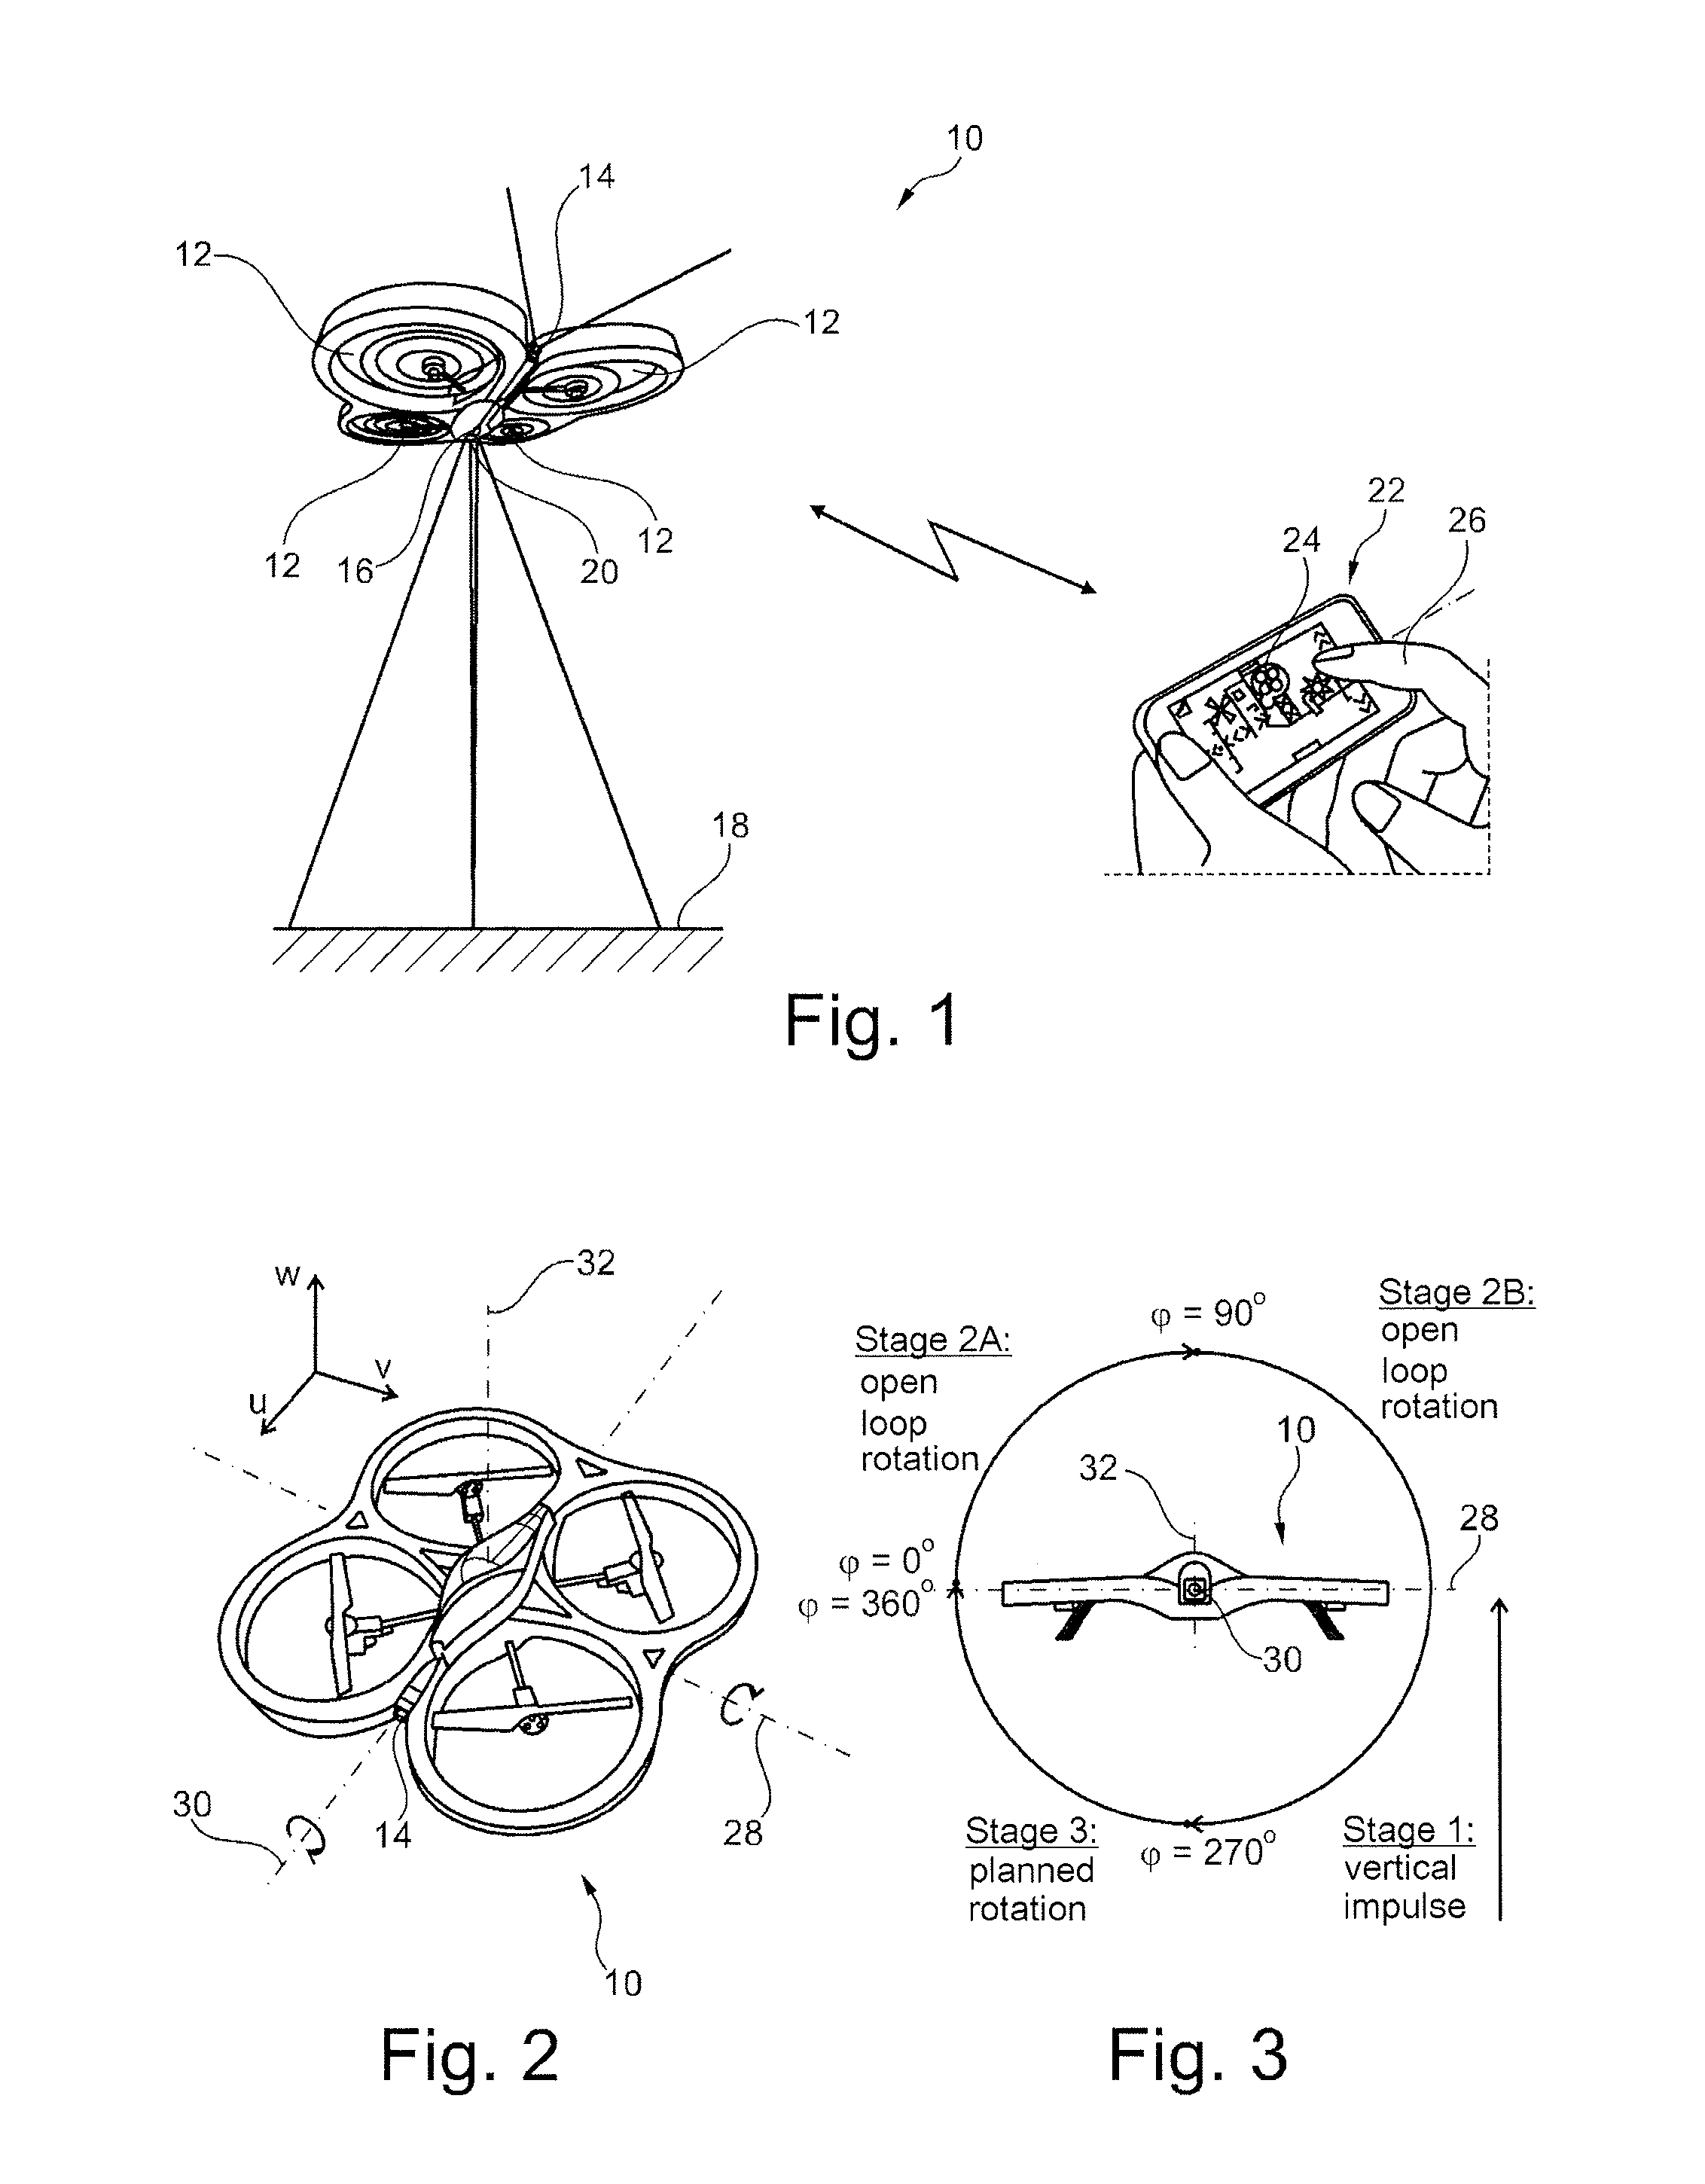 Method of dynamically controlling the attitude of a drone in order to execute a flip type maneuver automatically